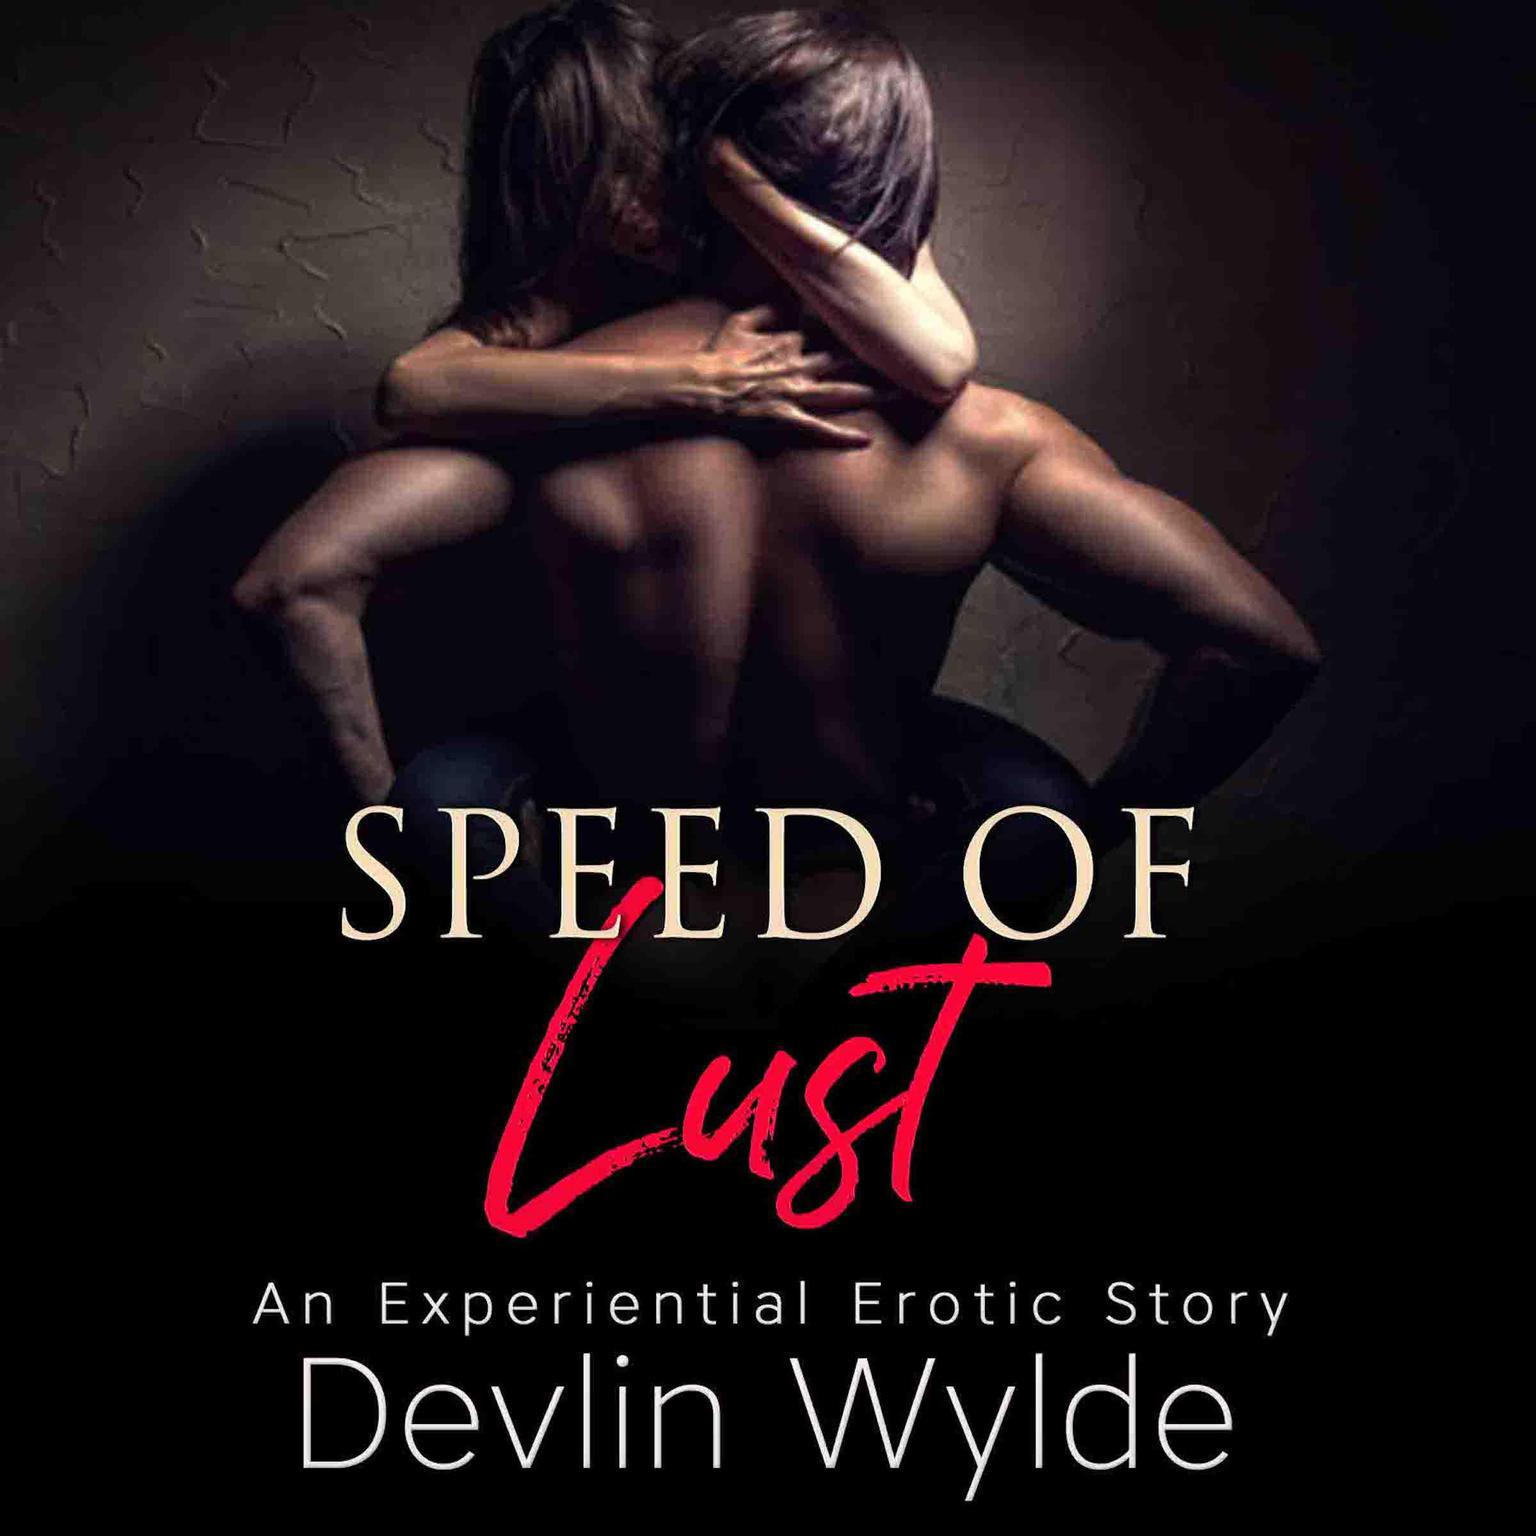 The Speed of Lust - An urban experiential erotic audio story of intense lust and passion.  Audiobook, by Devlin Wylde